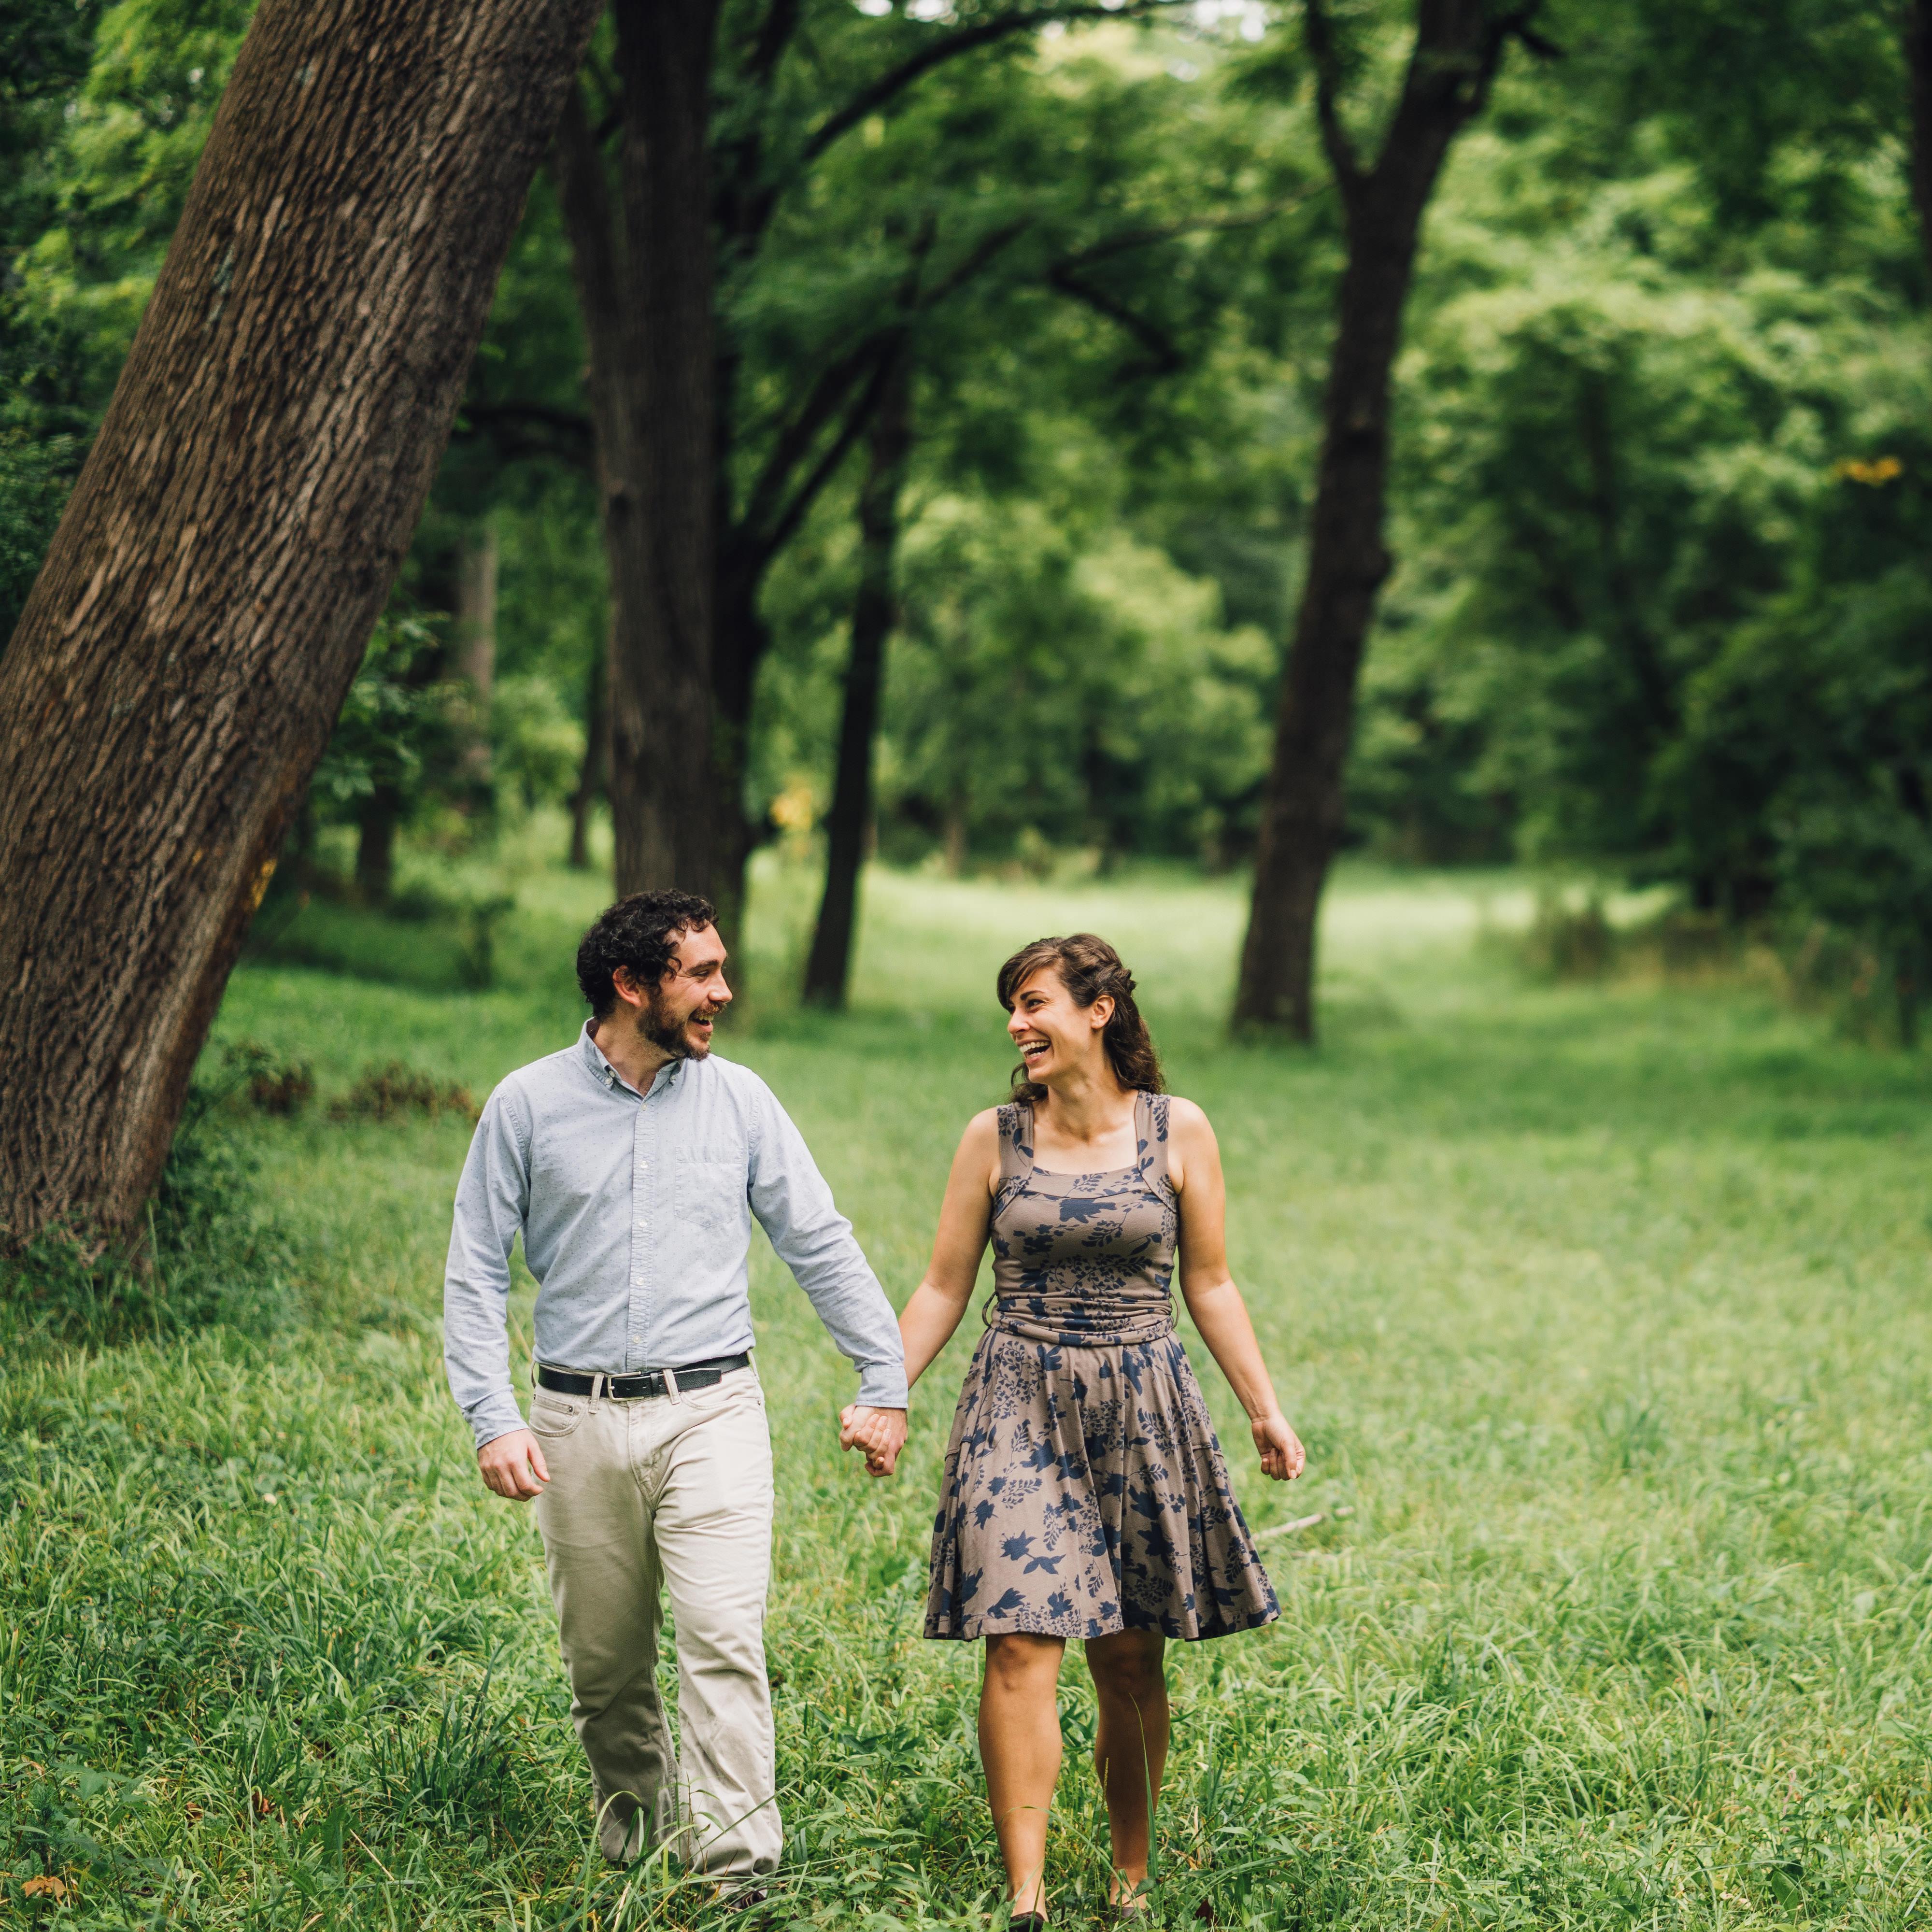 Falling in nerd love at Hunsberger Woods.

Photo credit to JD Land of Two15 Photography.